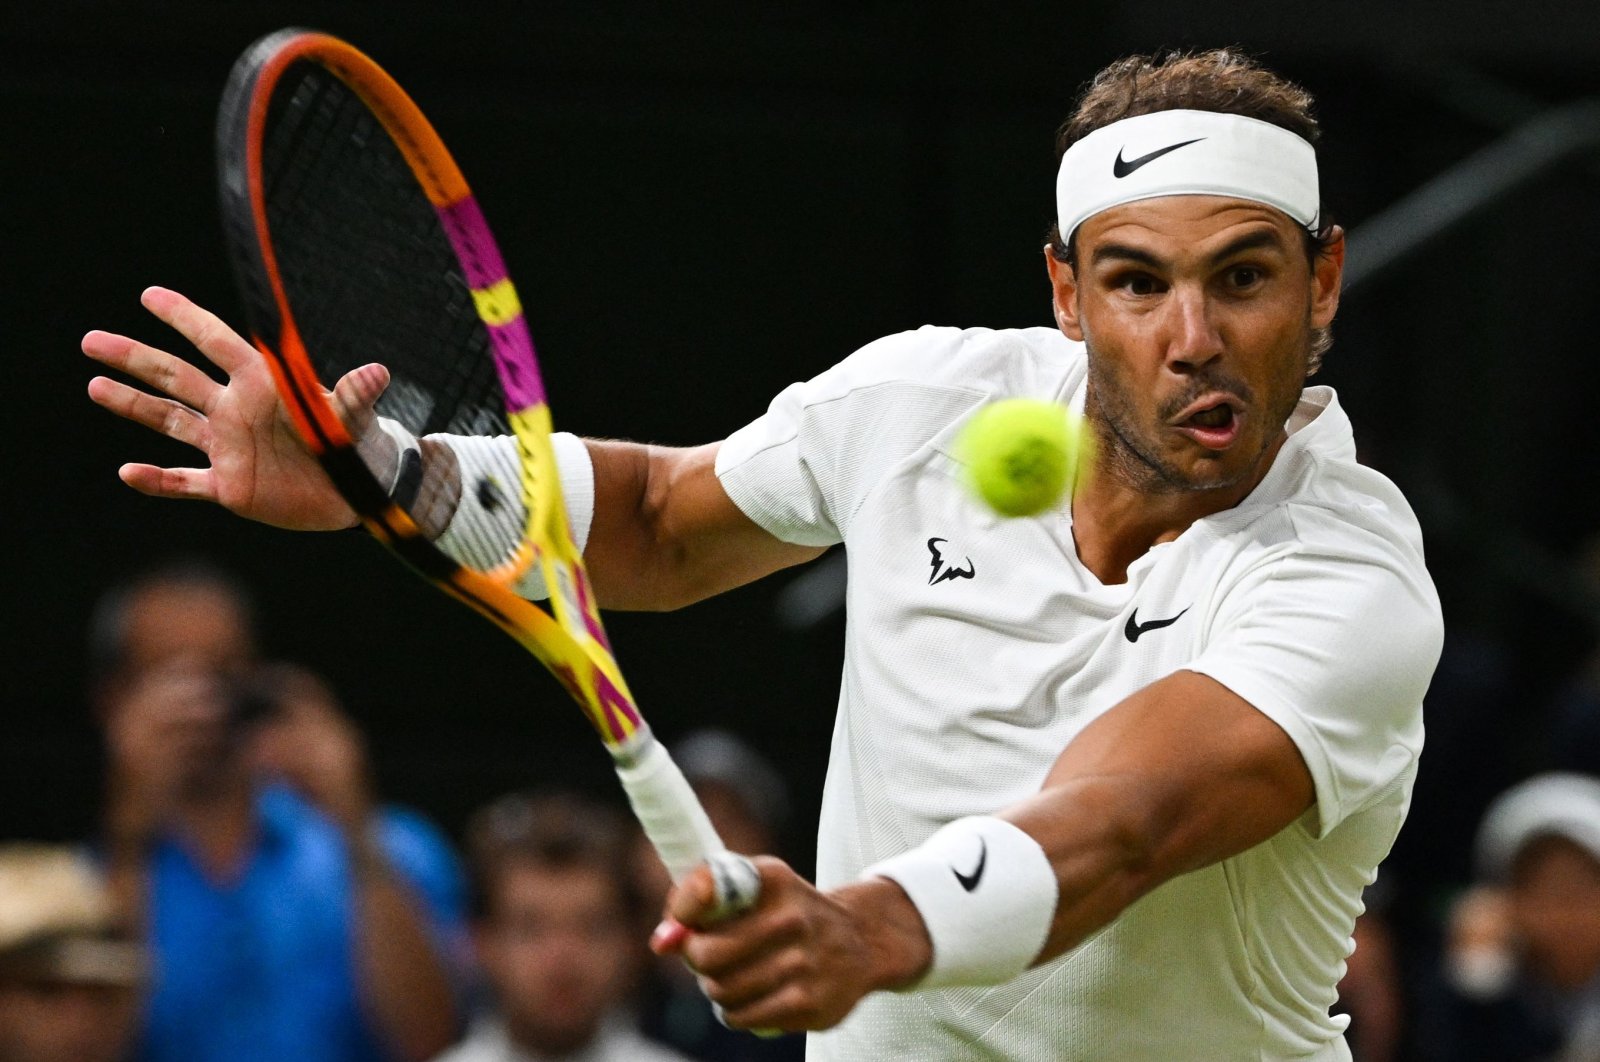 Spain&#039;s Rafael Nadal returns the ball to Italy&#039;s Lorenzo Sonego during their men&#039;s singles tennis match on the sixth day of the 2022 Wimbledon Championships at The All England Tennis Club in Wimbledon, London, U.K., July 2, 2022.  (AFP Photo)